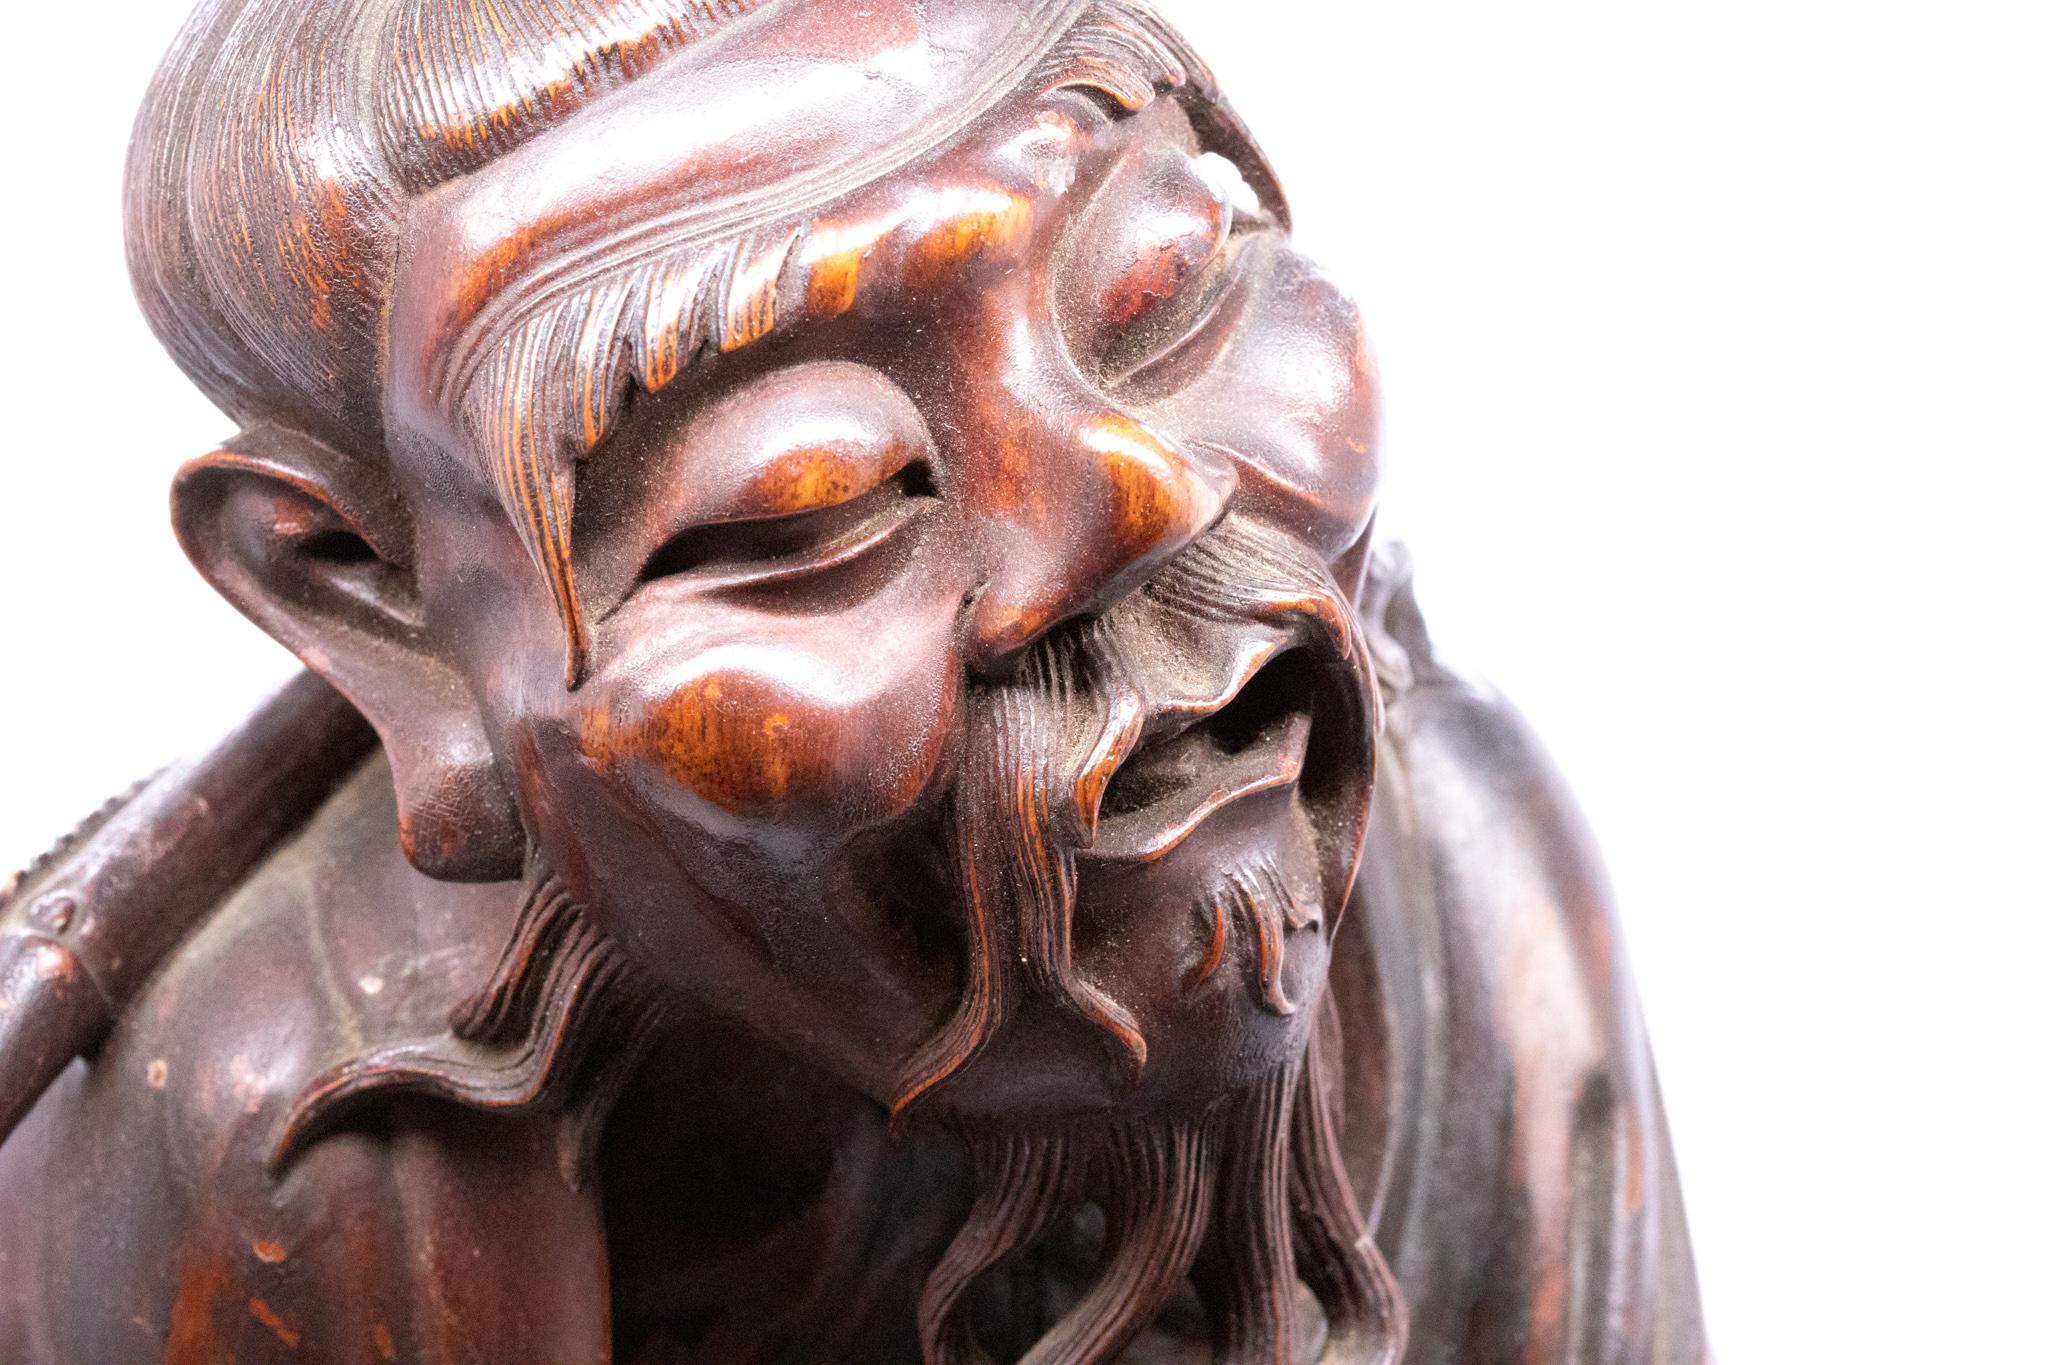 Japanese Japan 1890 Meiji Period Ebisu Sculpture in Wood Carving of an Old Fisherman For Sale